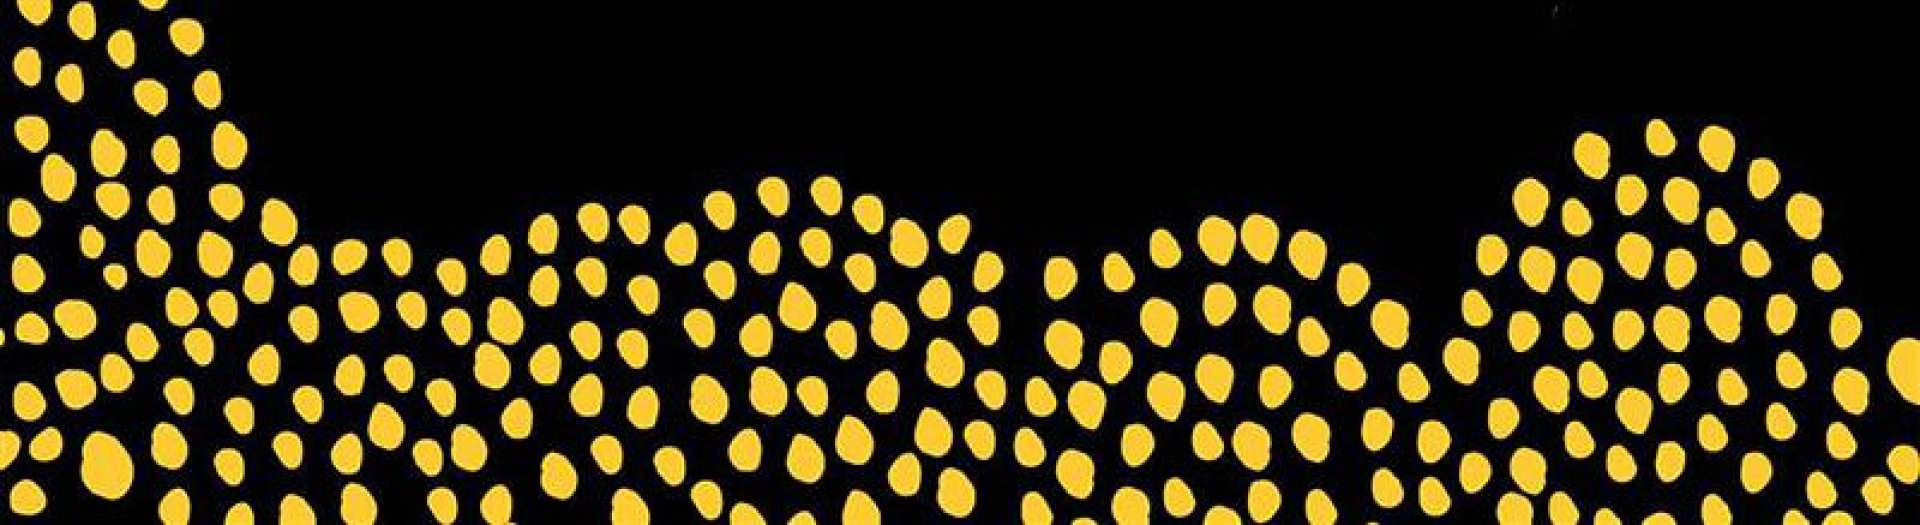 Yellow dots in circular patterns on a black background